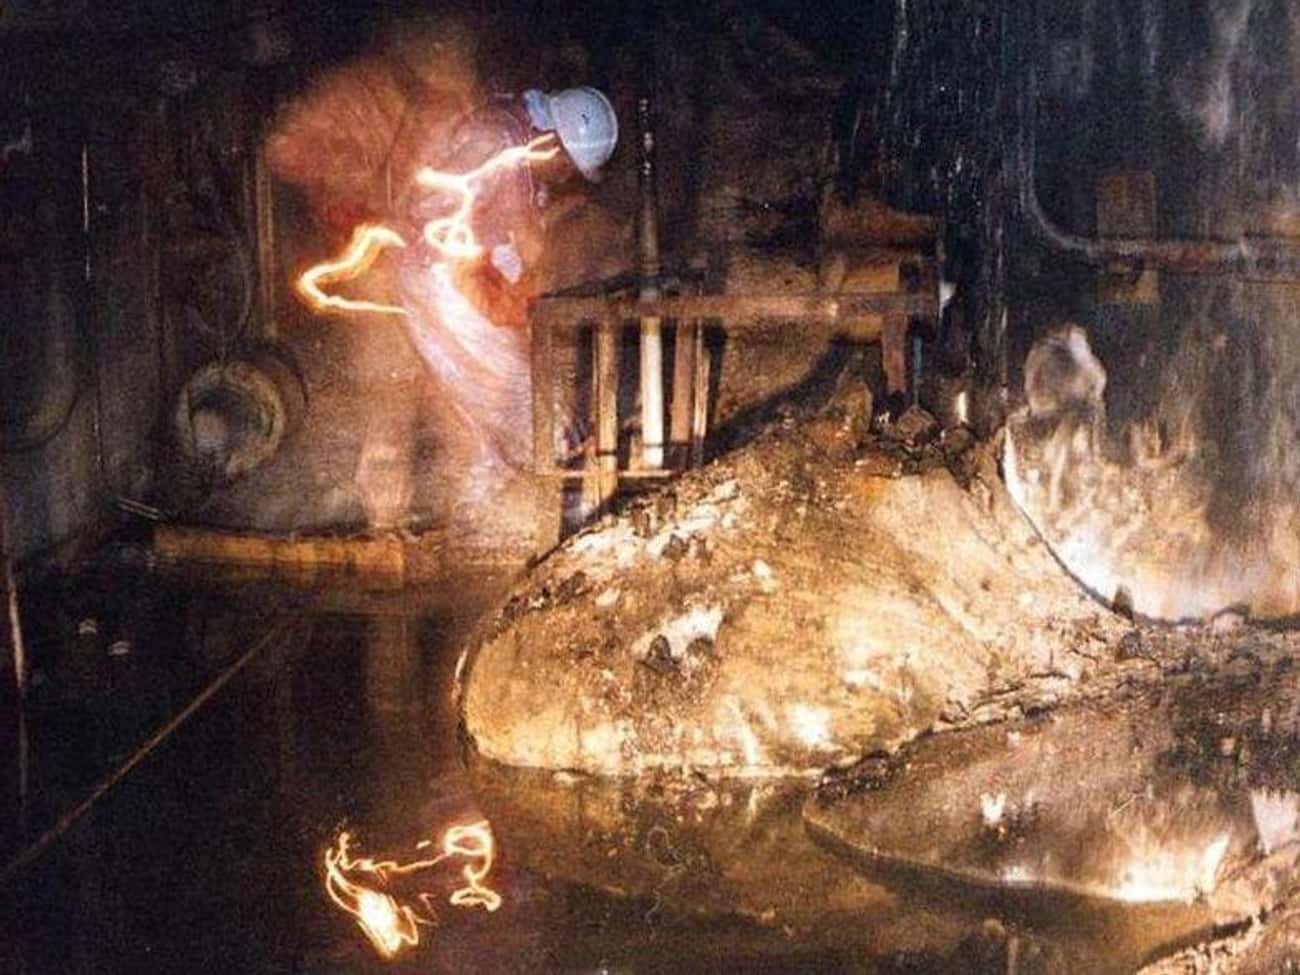 The Elephant’s Foot Was A Side-Effect Of The Chernobyl Disaster